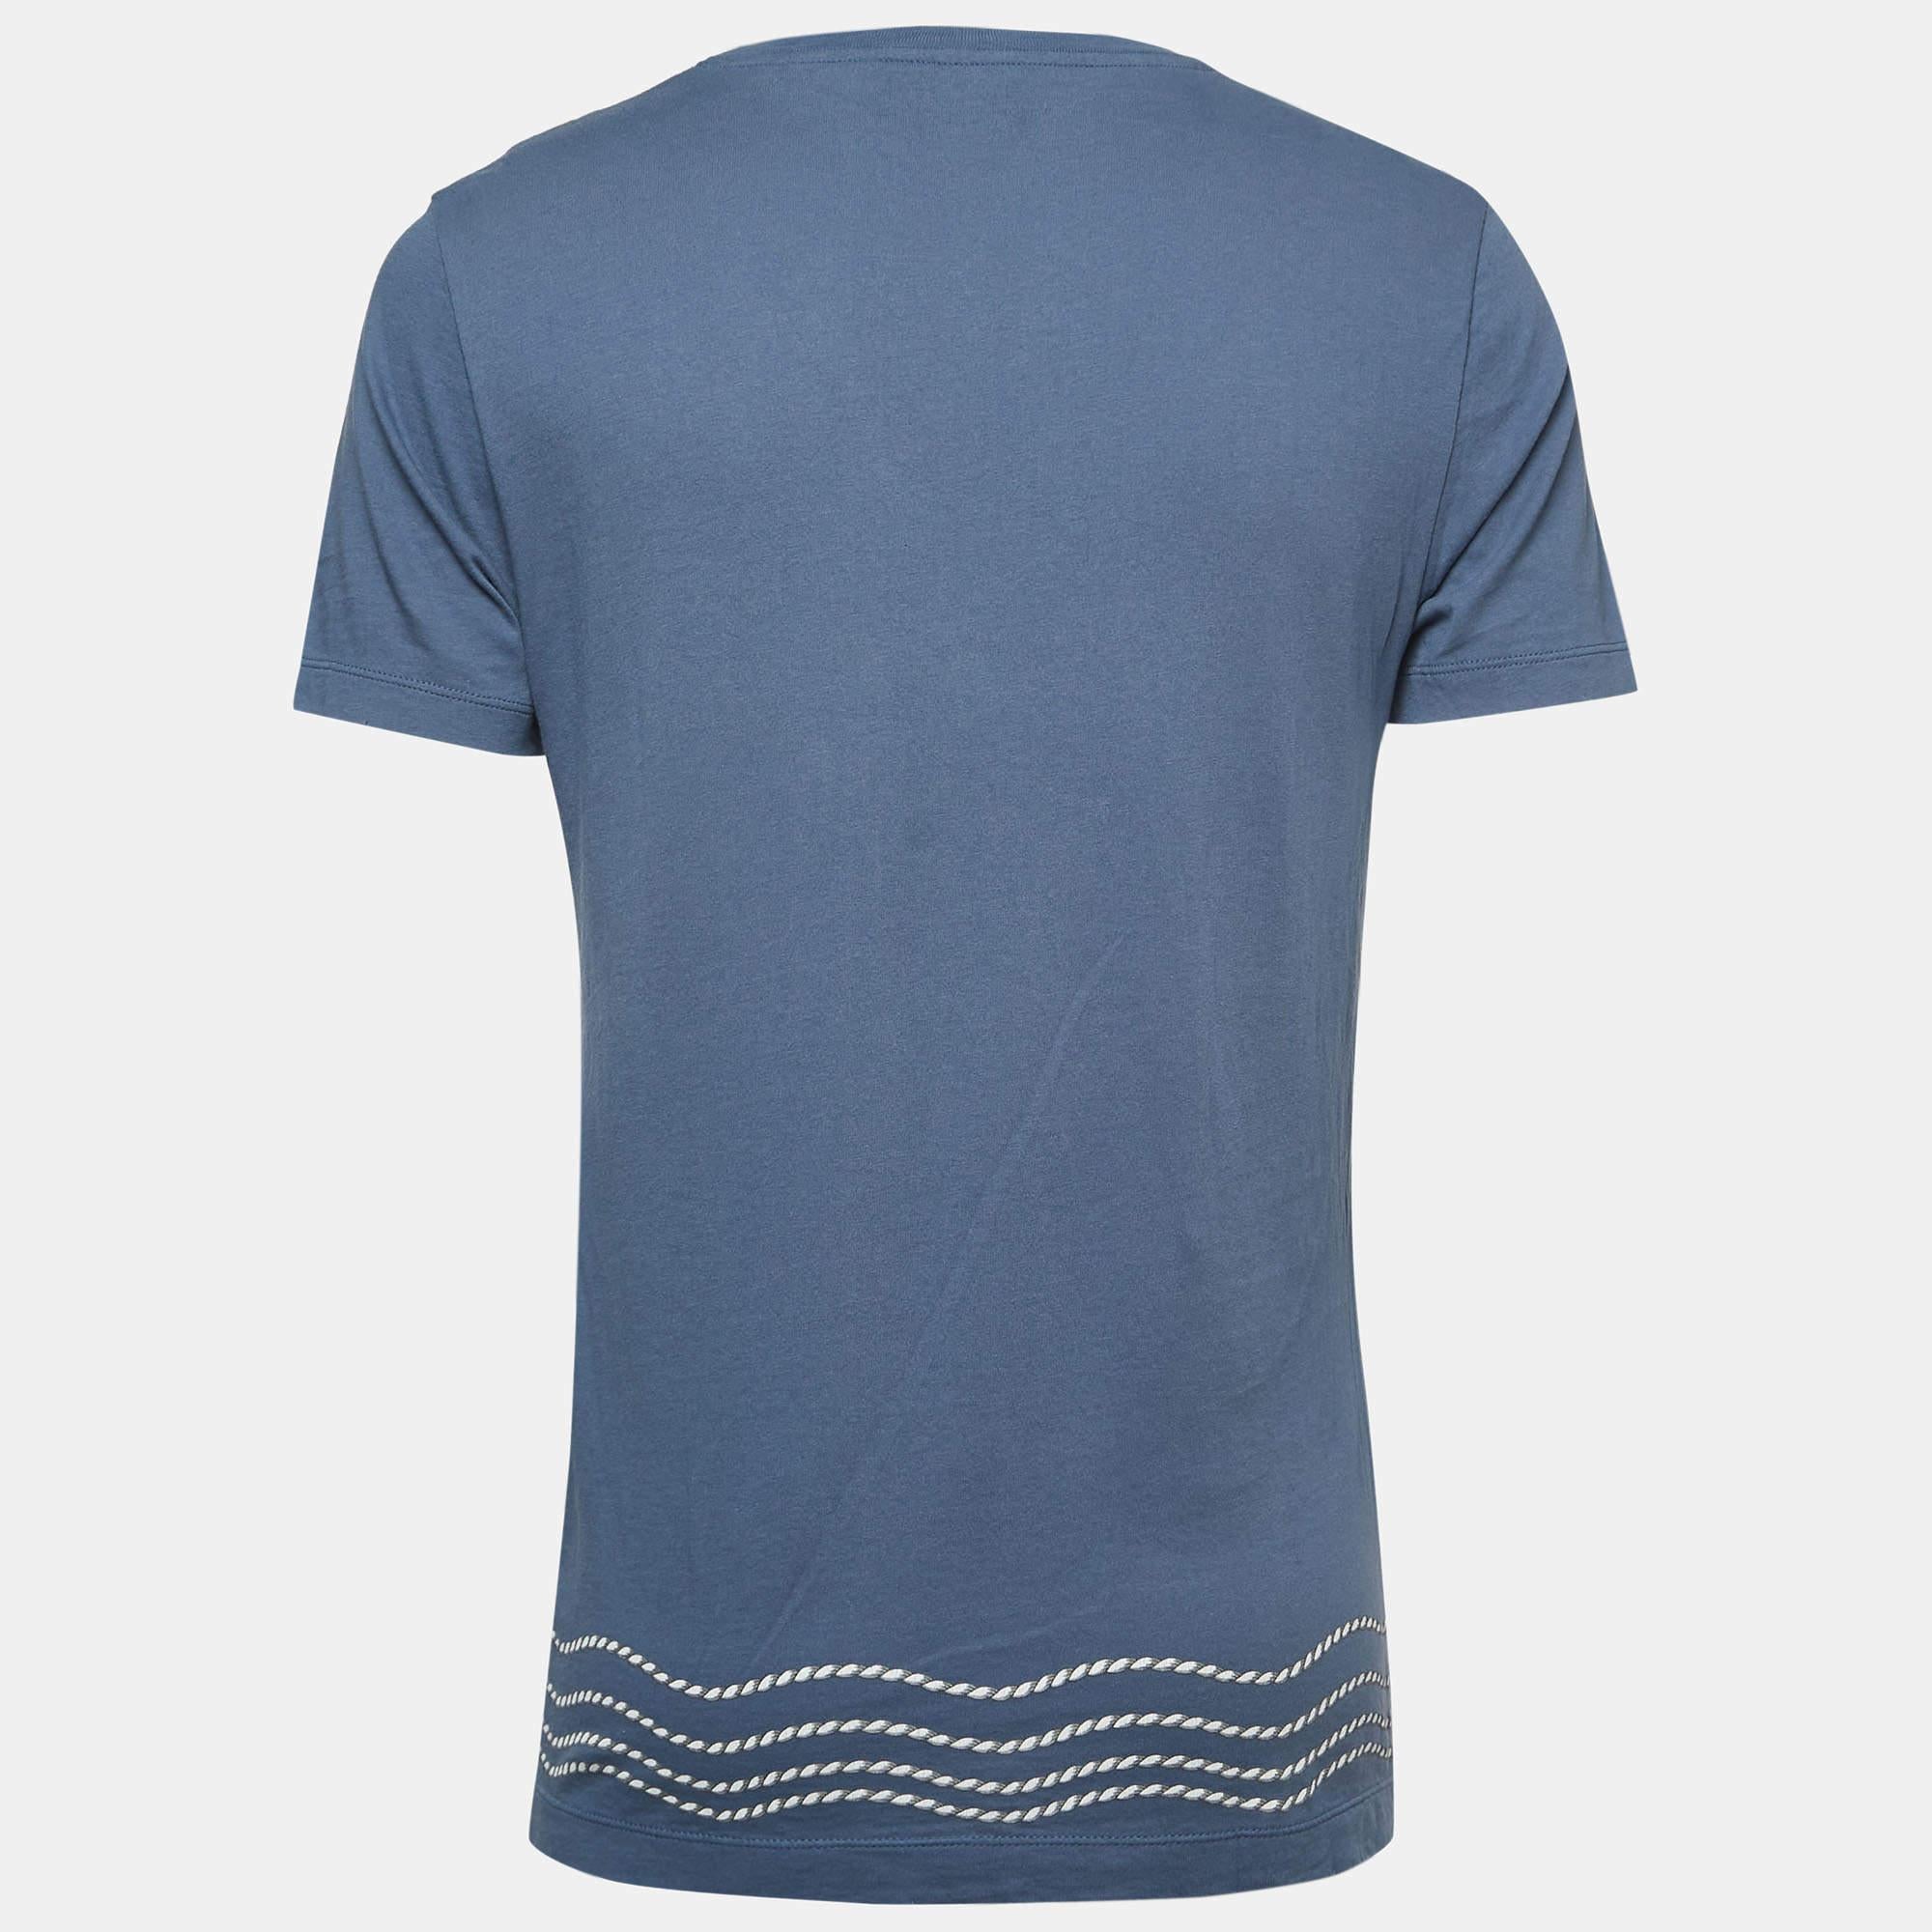 Whether you want to go out on casual outings with friends or just want to lounge around, this t-shirt is a versatile piece and can be styled in many ways. It has been made using fine fabric.

